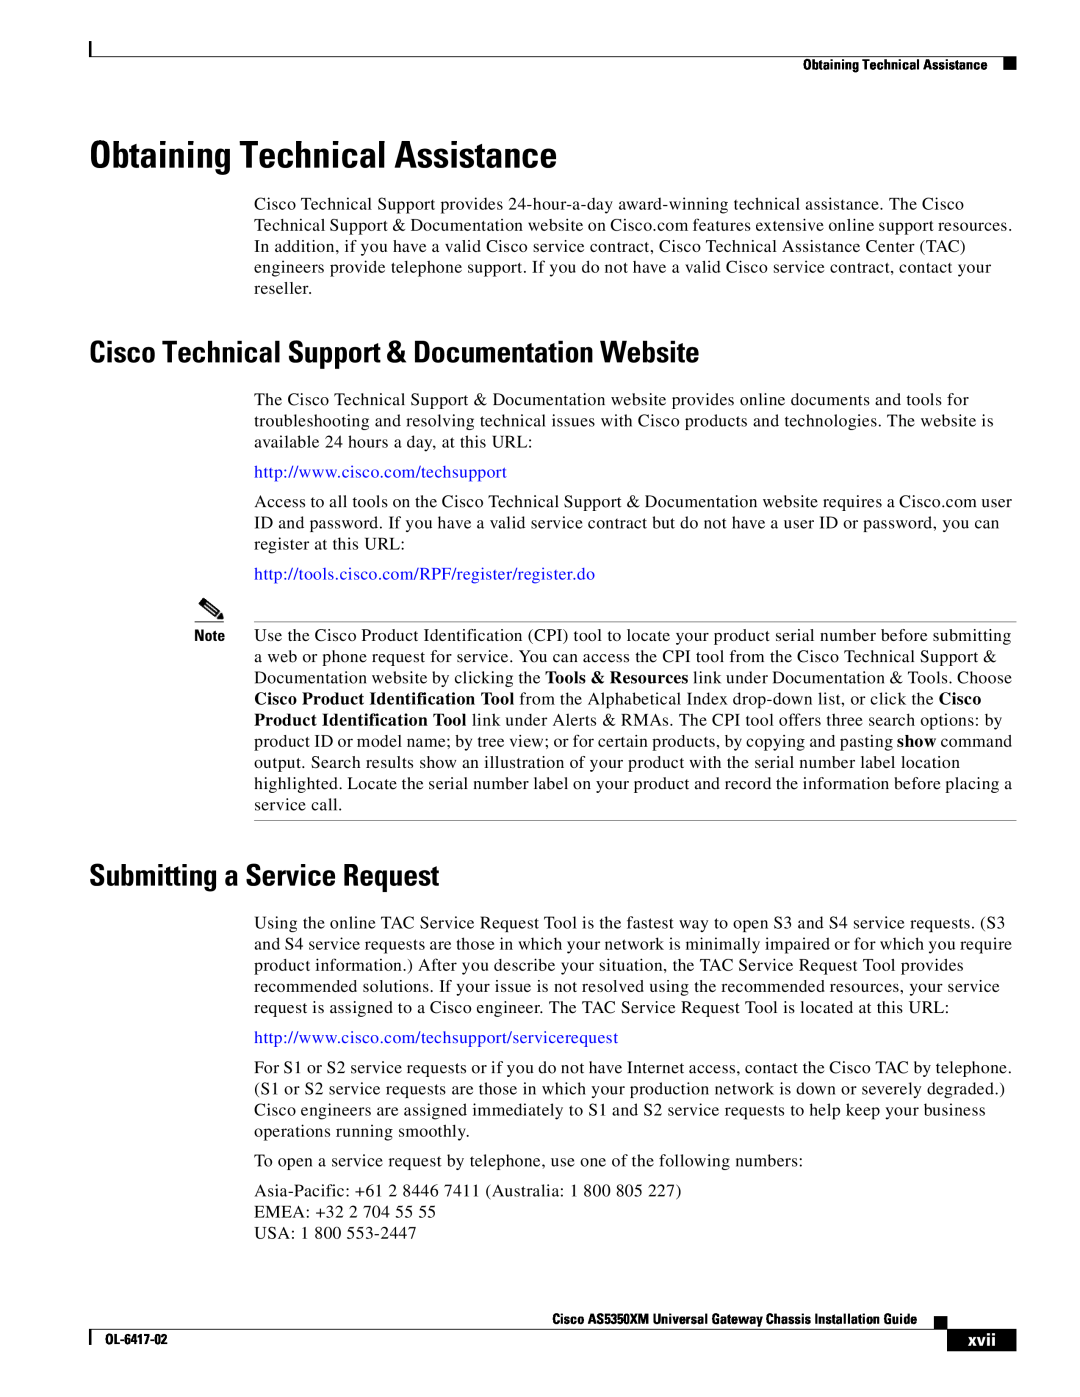 Cisco Systems AS5350XM manual Obtaining Technical Assistance, Cisco Technical Support & Documentation Website, xvii 